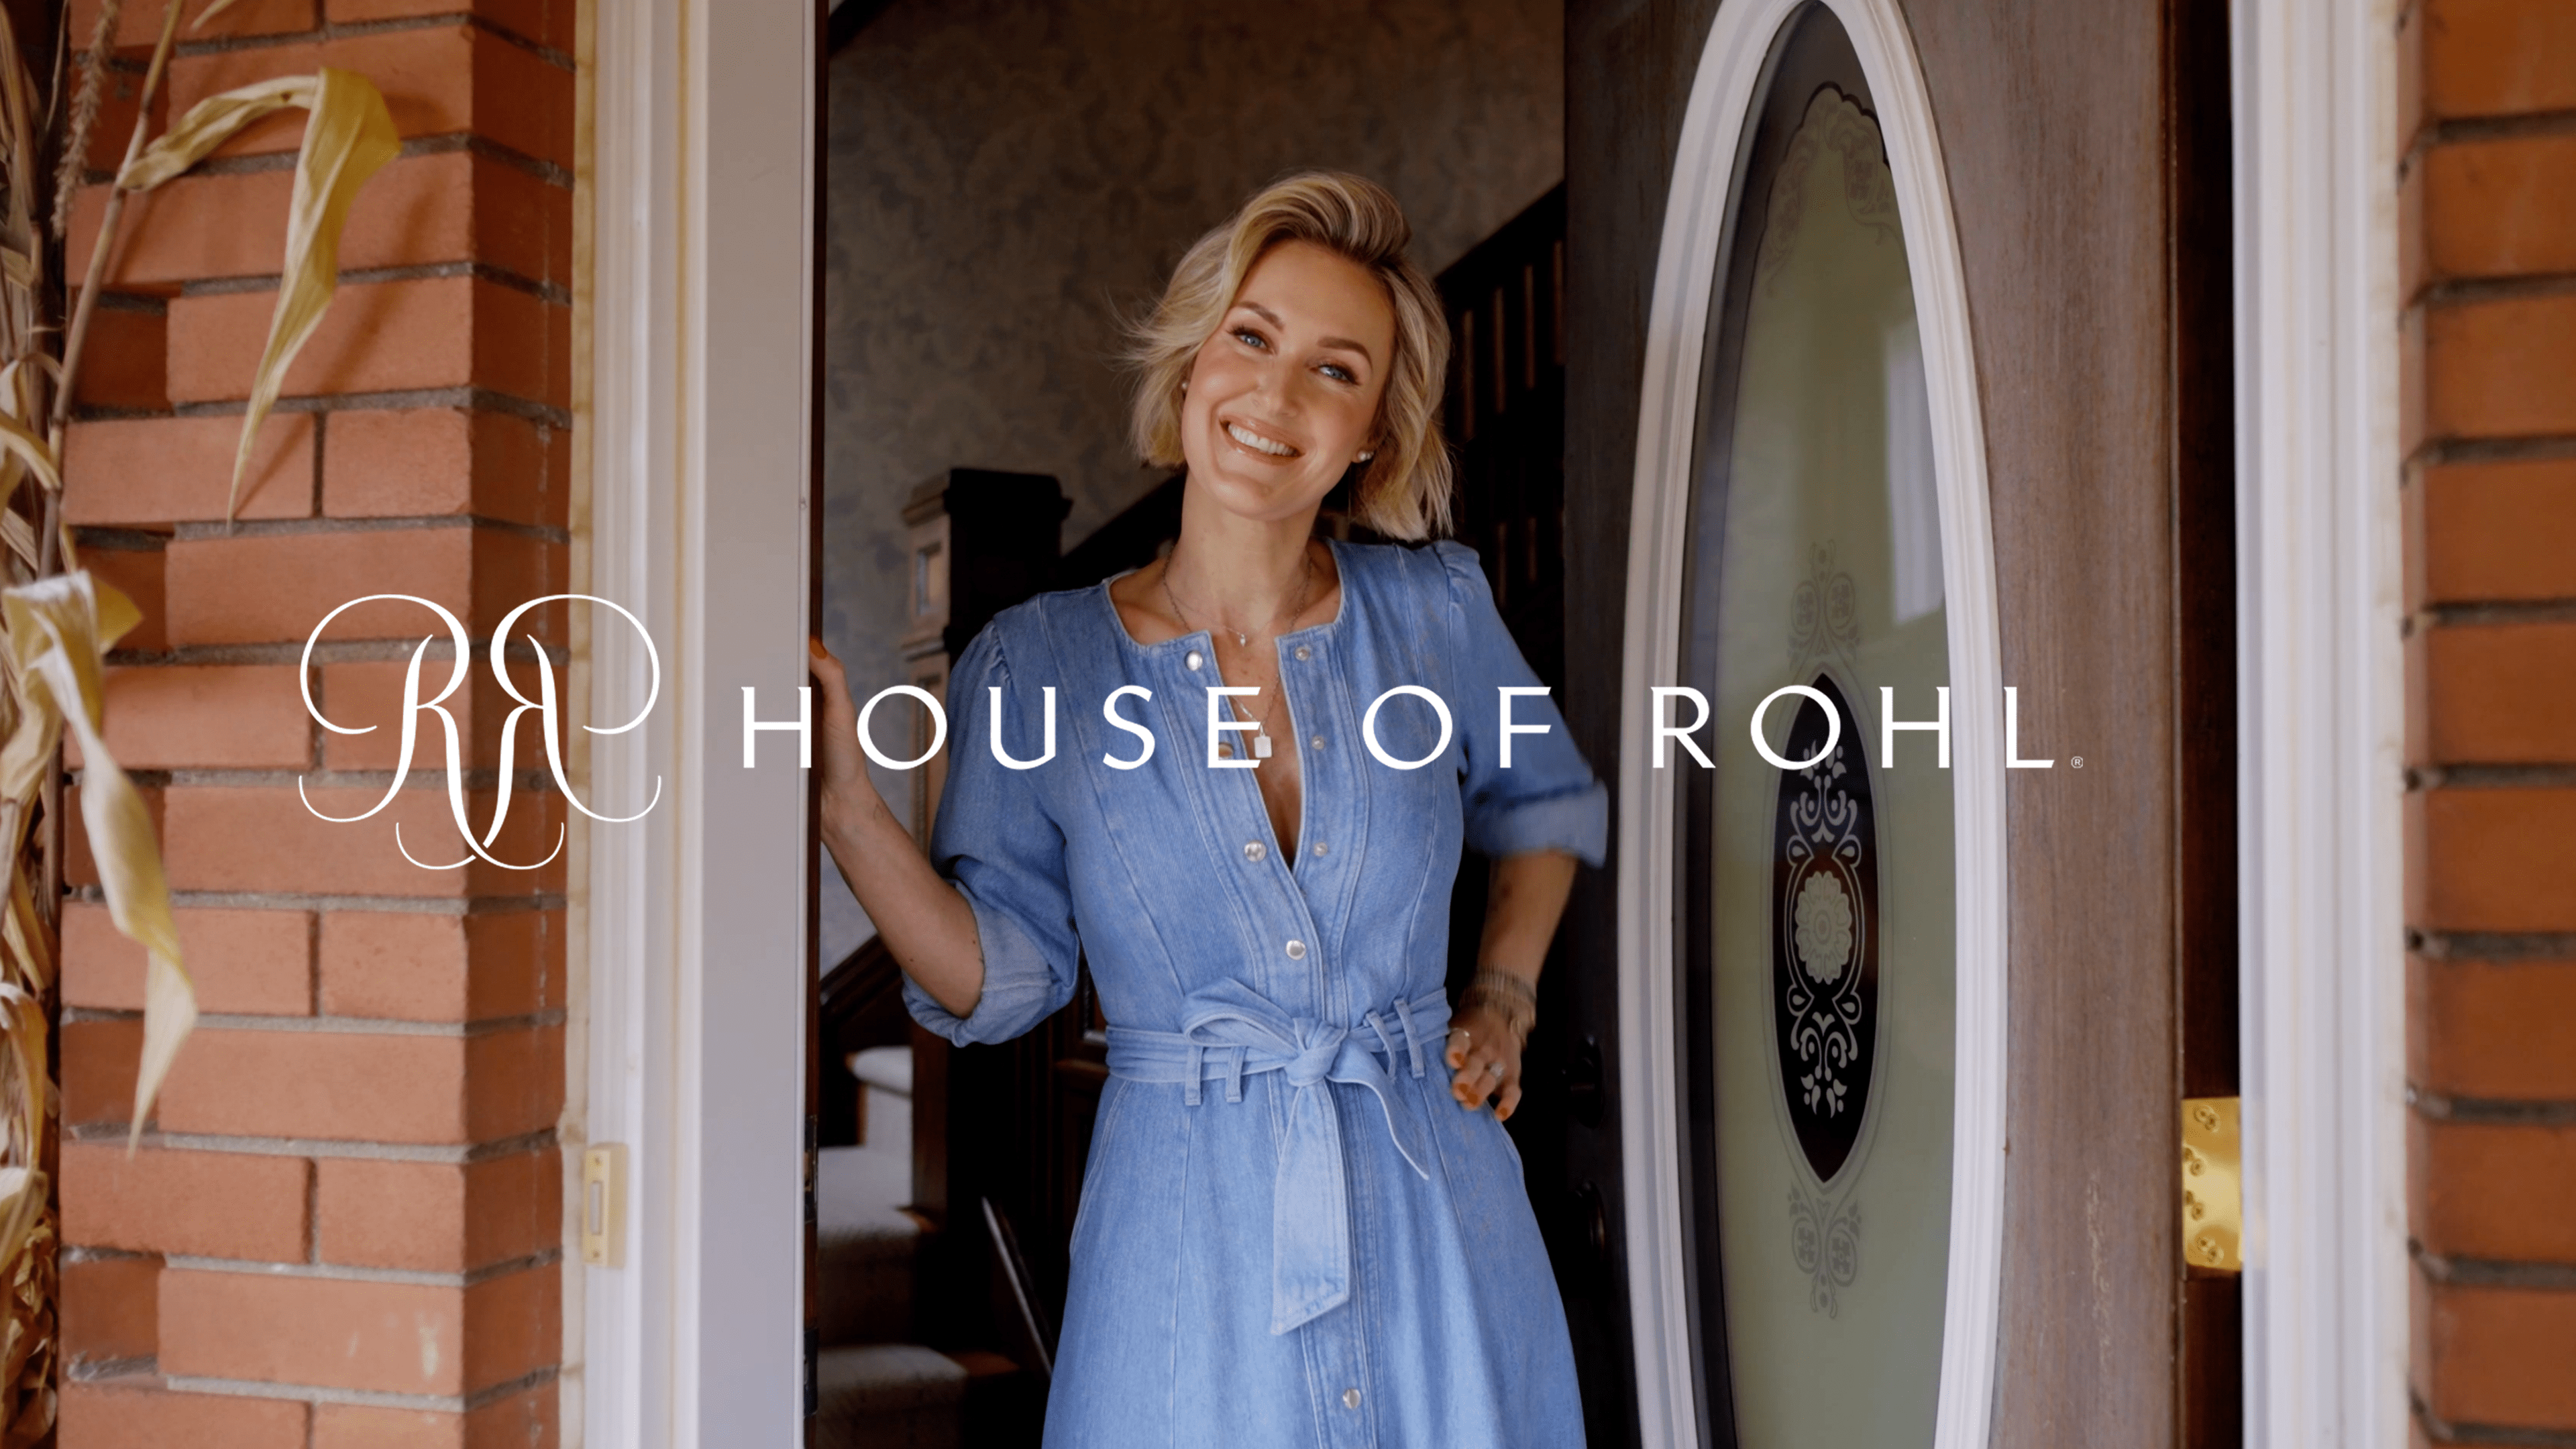 House of Rohl / “Farmhouse Tour with Carolyn Wilbrink”